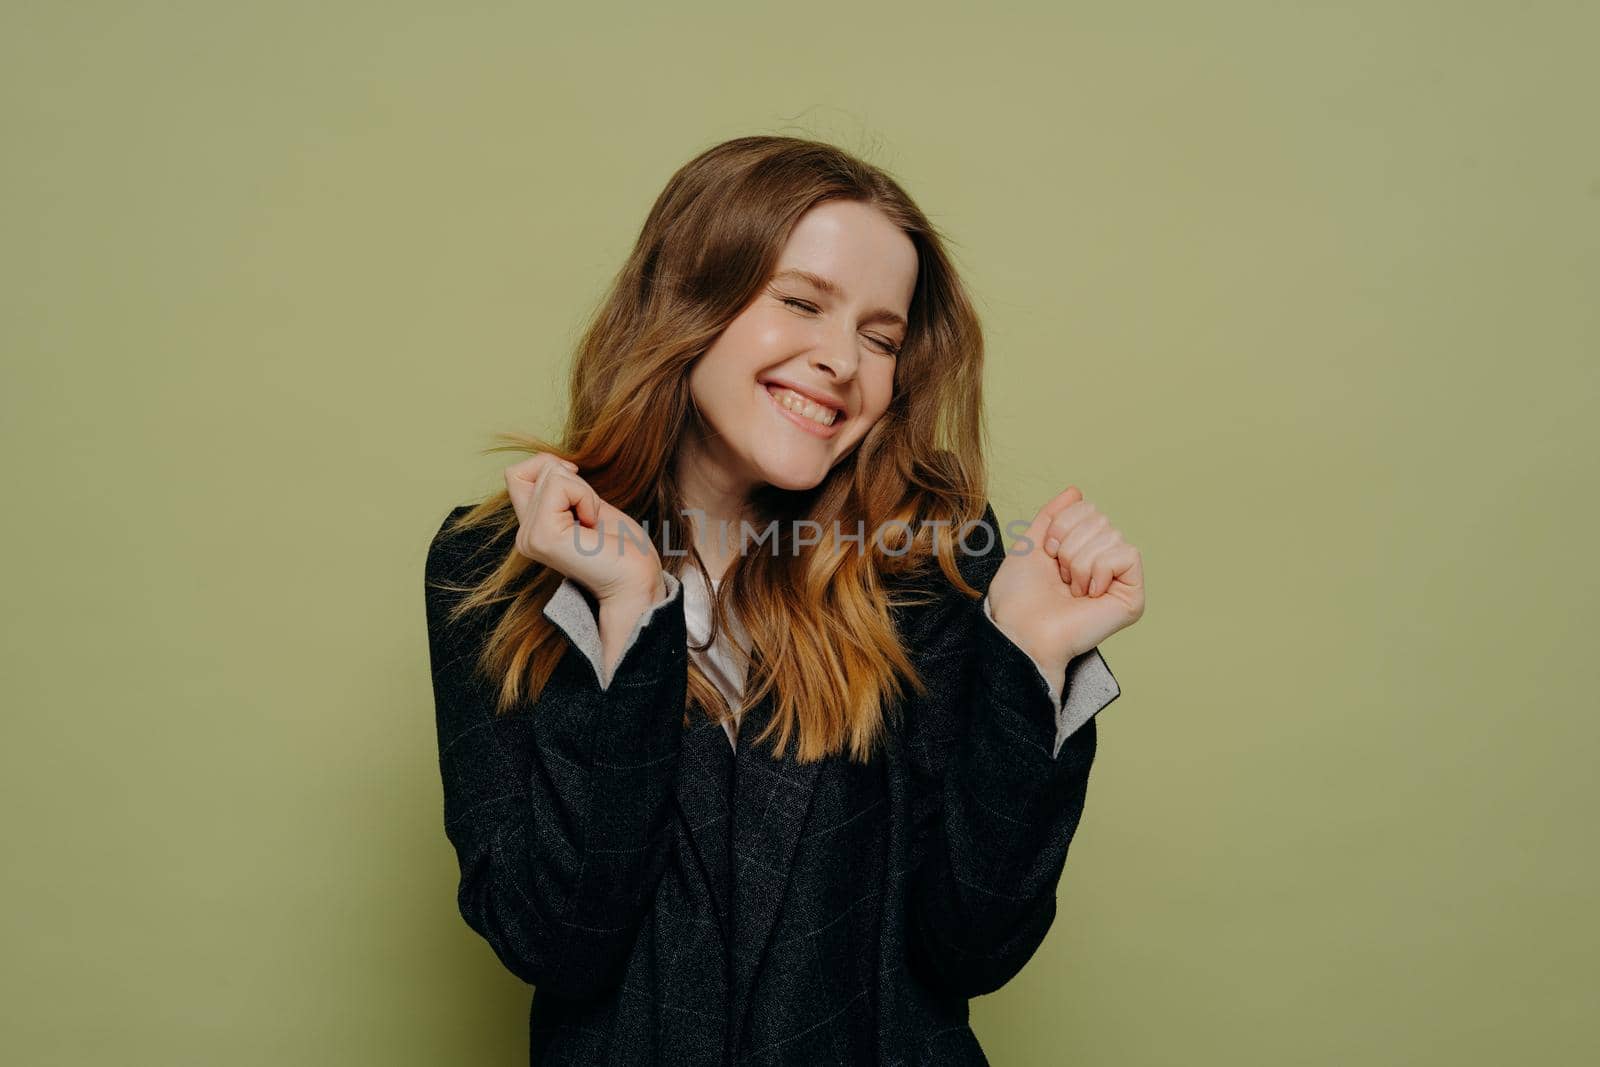 Happy young woman with closed eyes holding hands up with excitement by vkstock